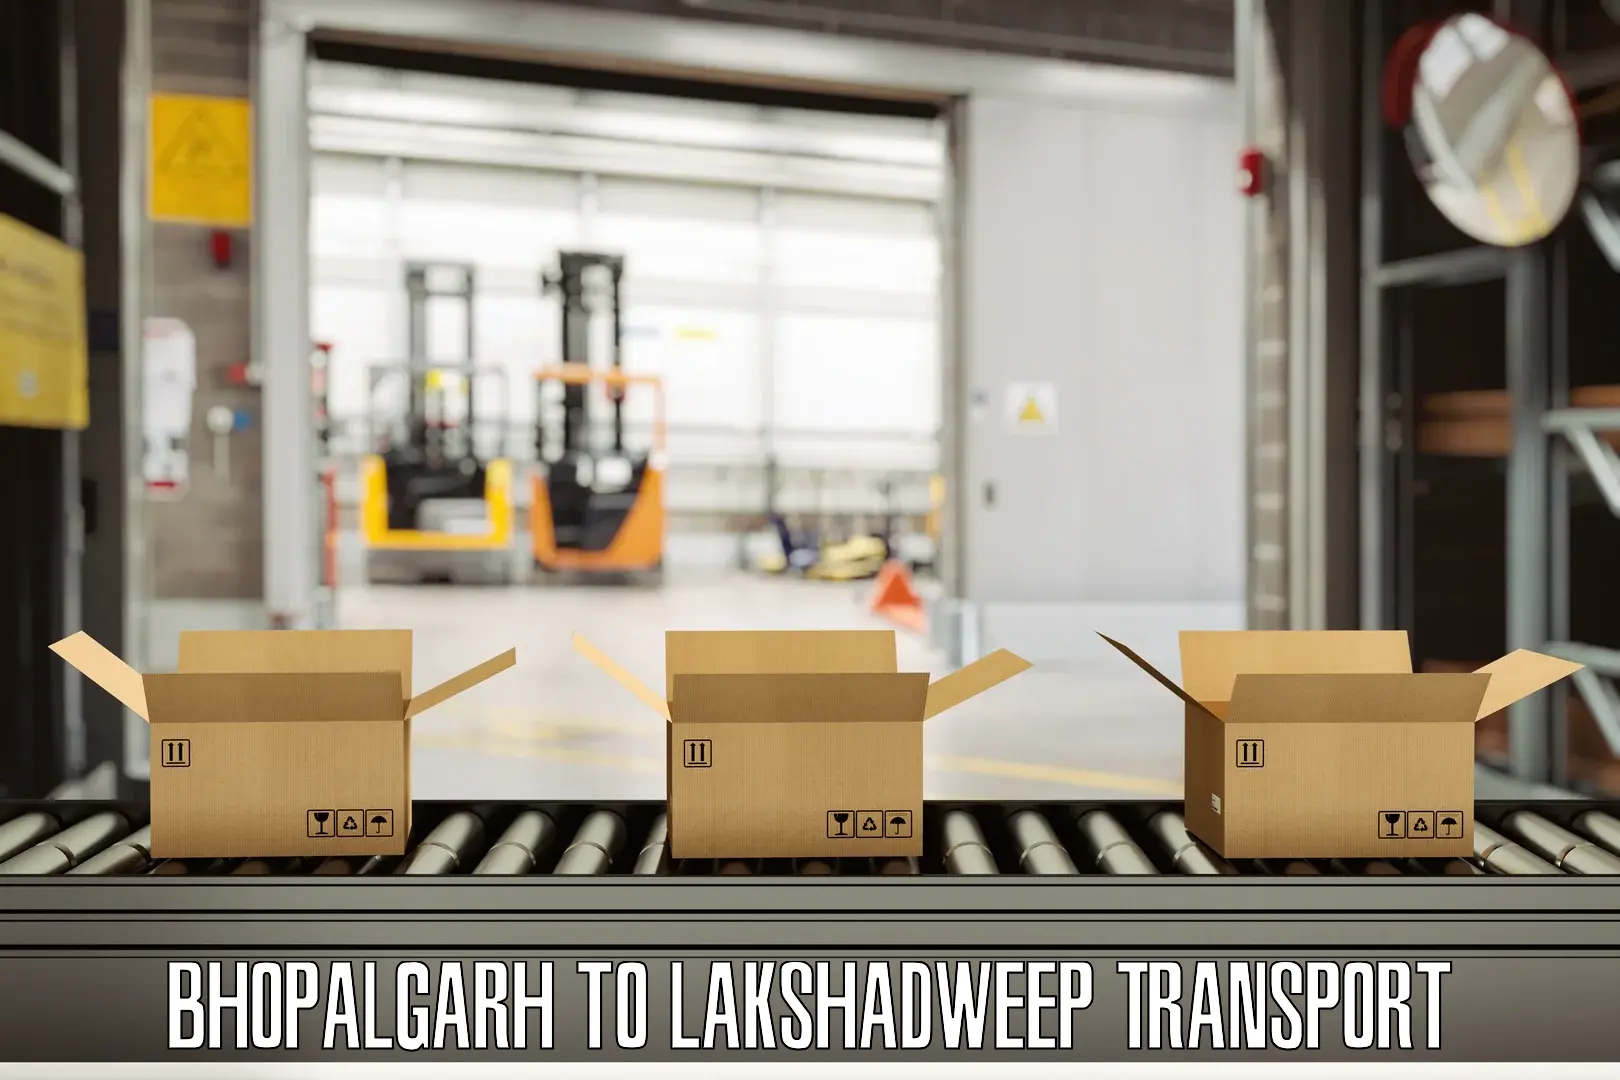 Part load transport service in India Bhopalgarh to Lakshadweep